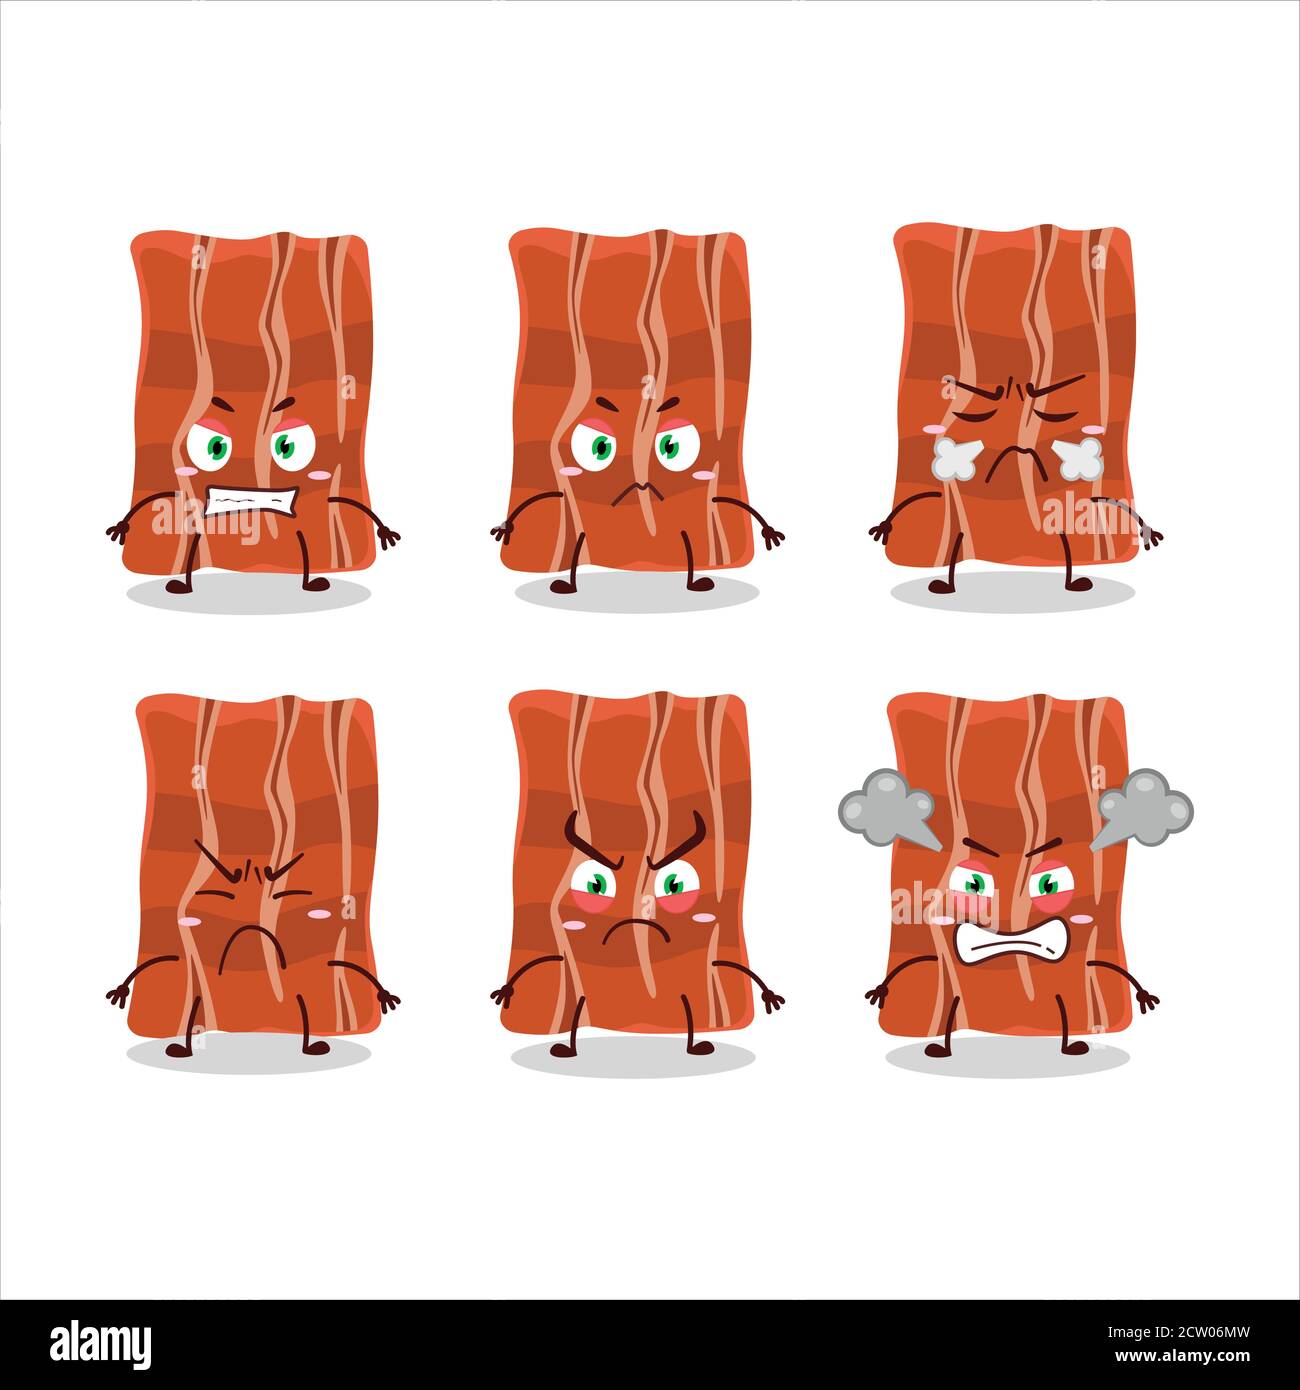 Fried bacon cartoon character with various angry expressions Stock Vector